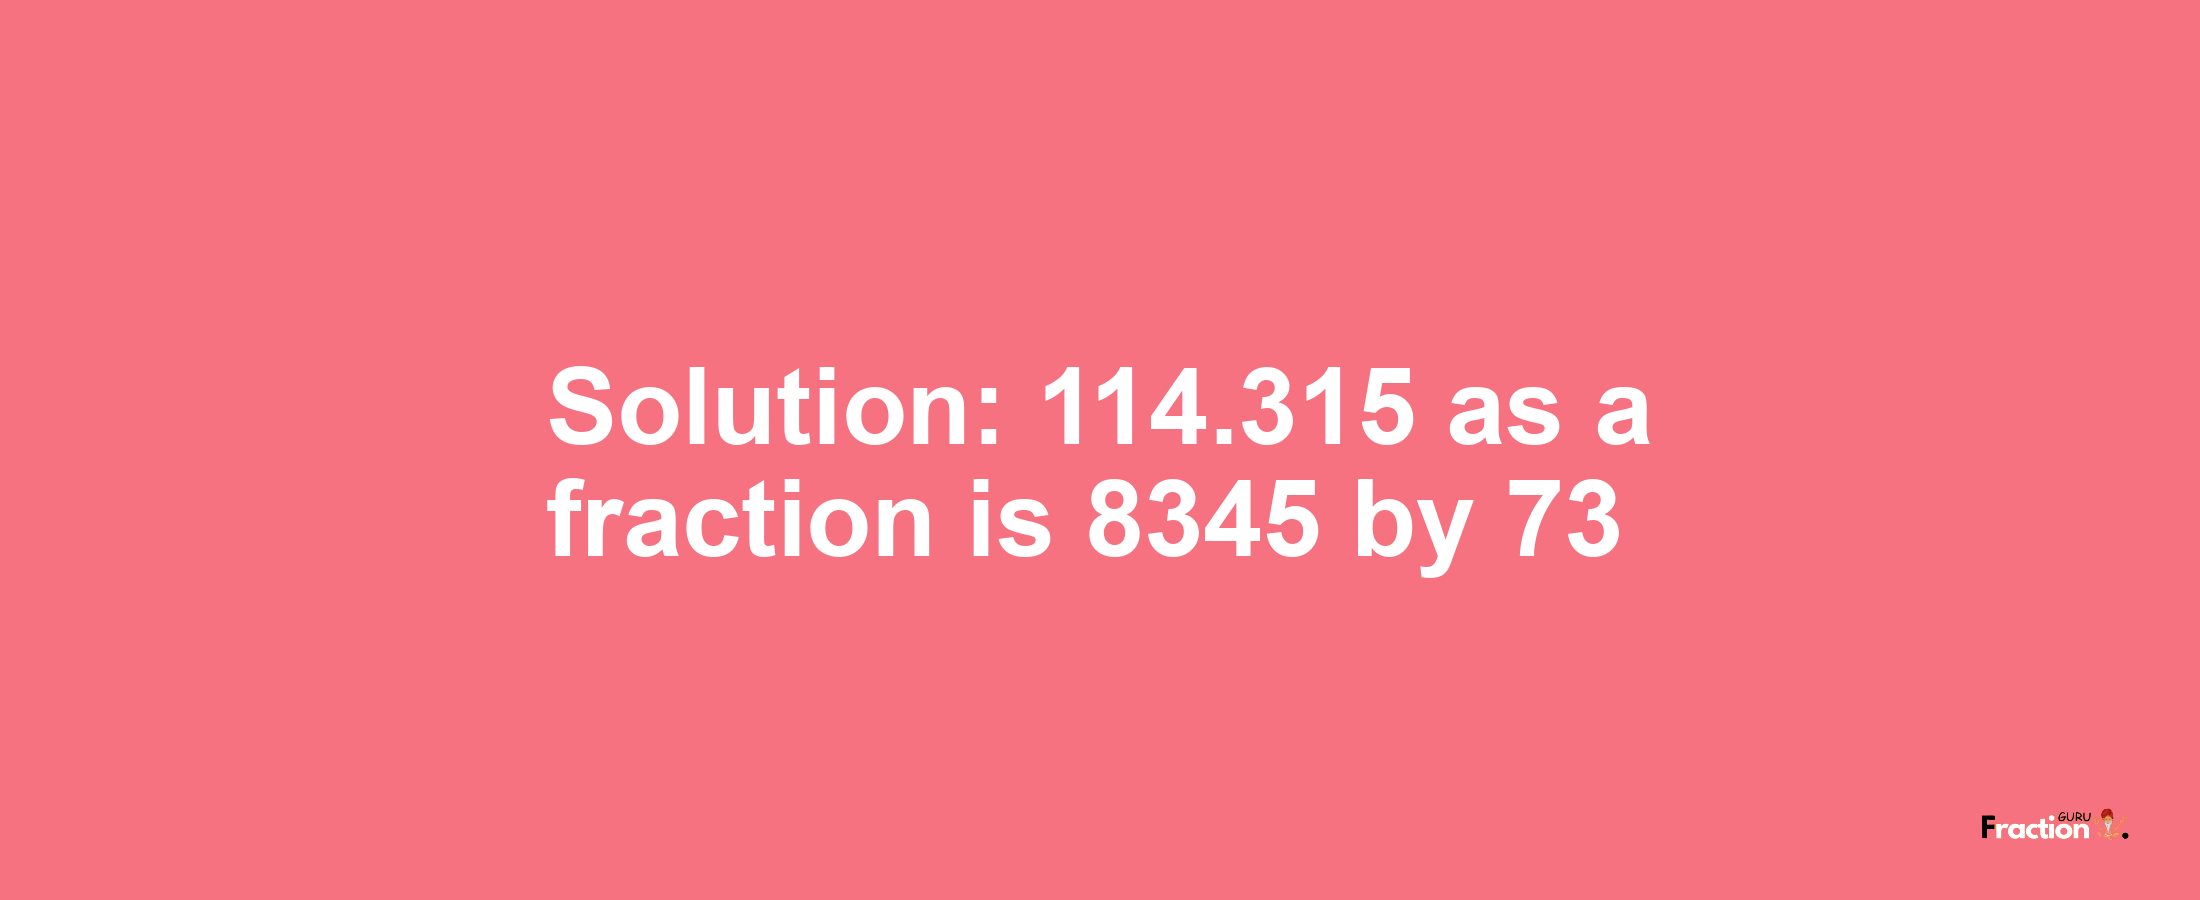 Solution:114.315 as a fraction is 8345/73